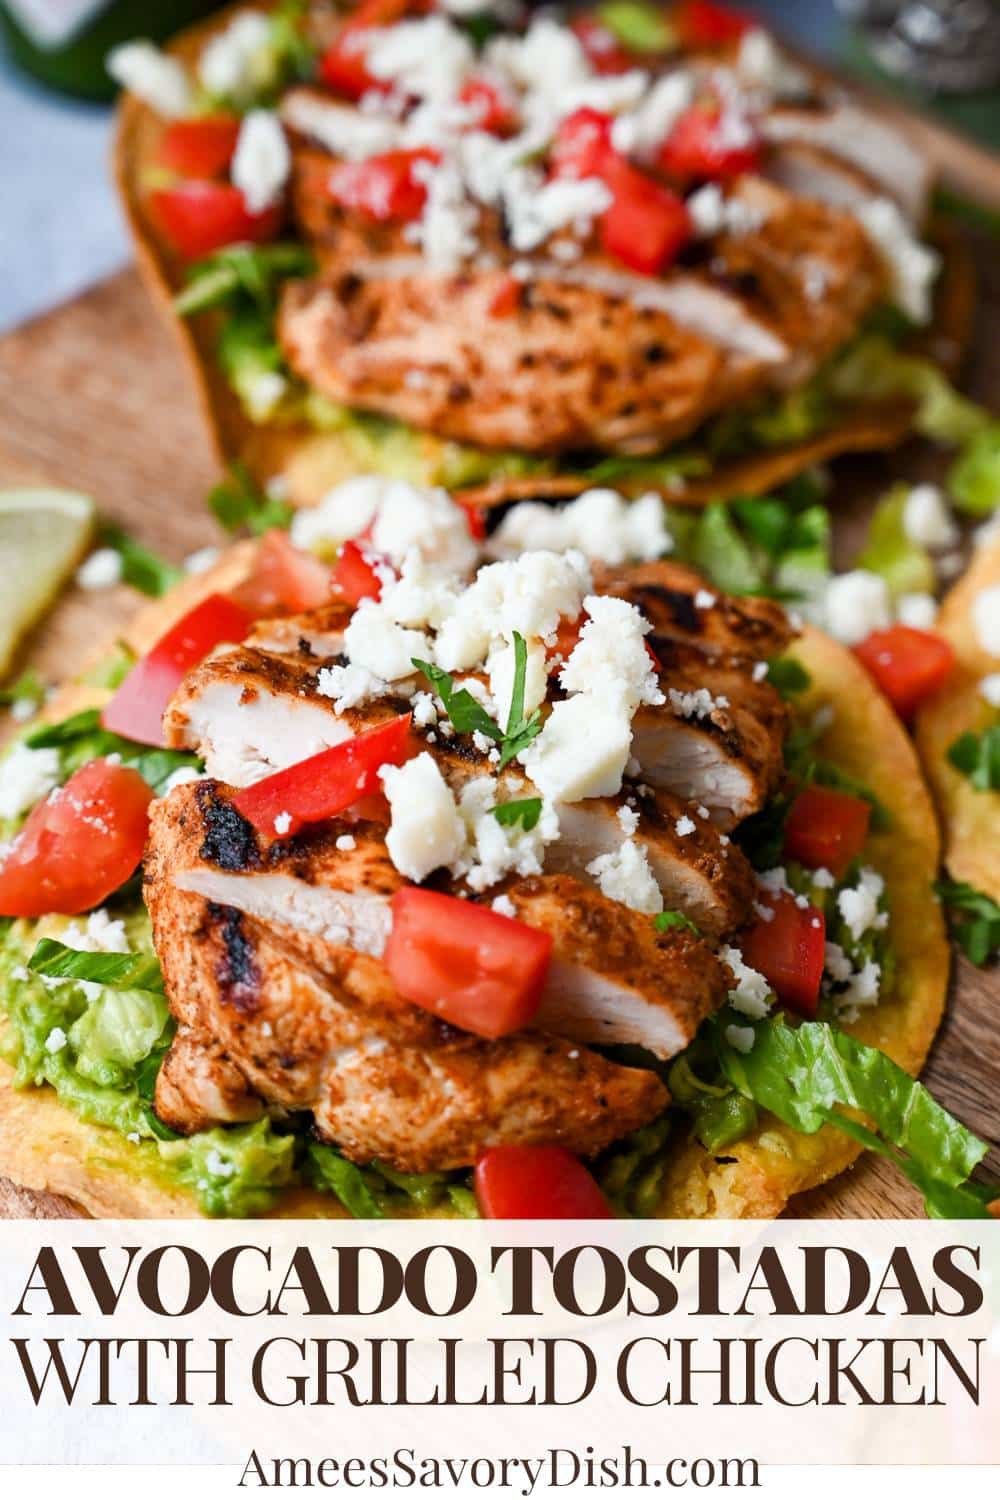 These protein-packed avocado tostadas showcase crispy tortillas loaded with mashed avocado, fajita-seasoned grilled chicken, and other taco-topping favorites. via @Ameessavorydish